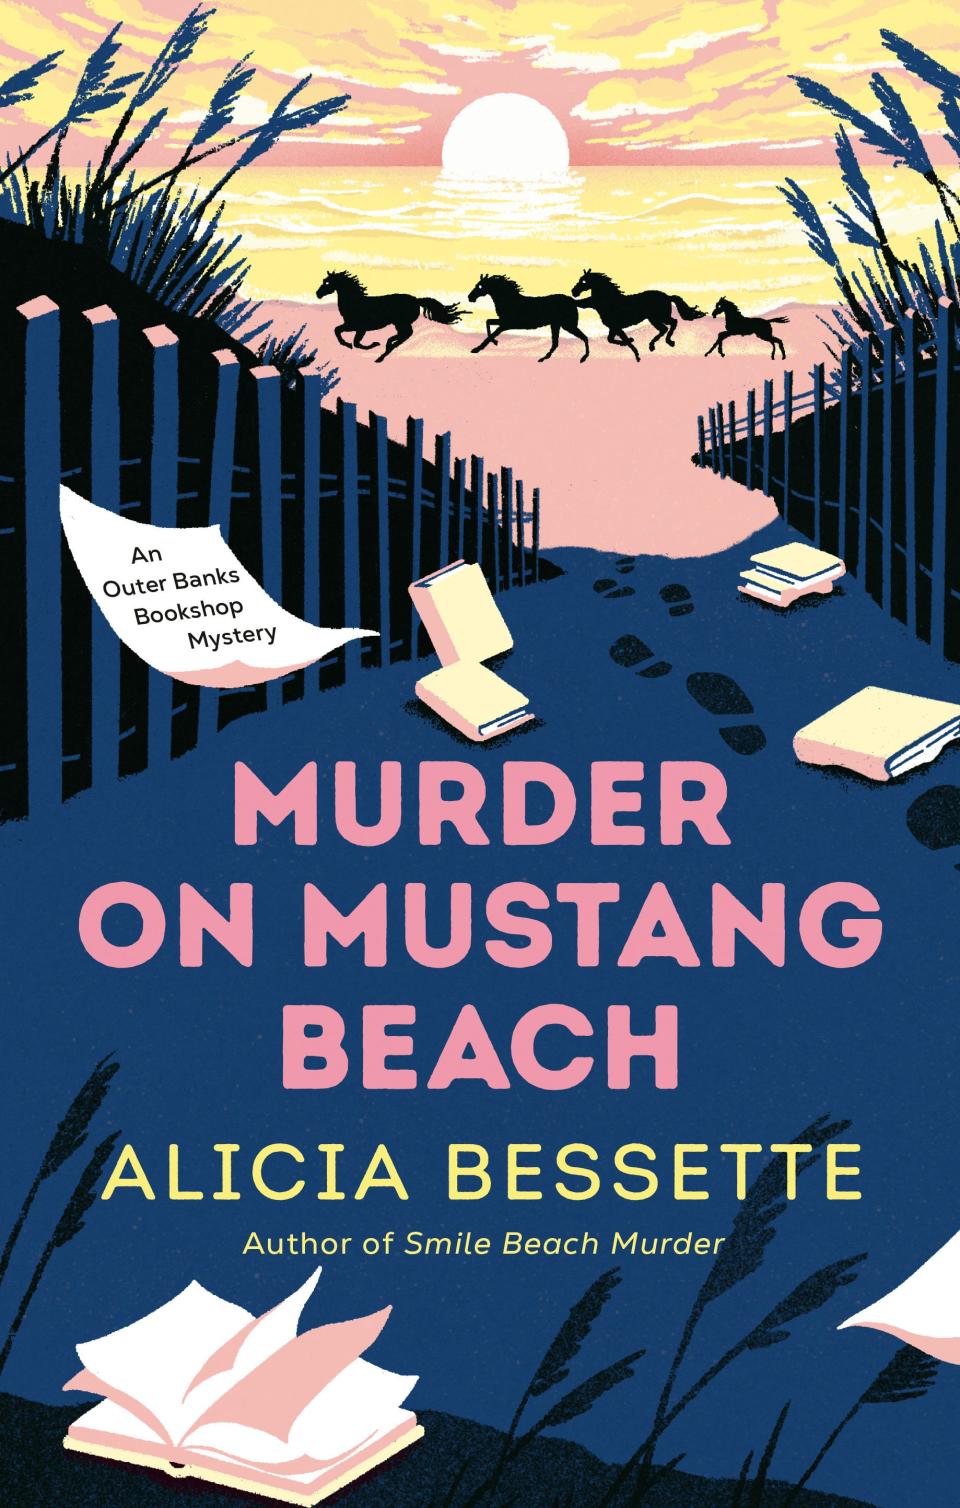 "Murder on Mustang Beach," by Alicia Bessette